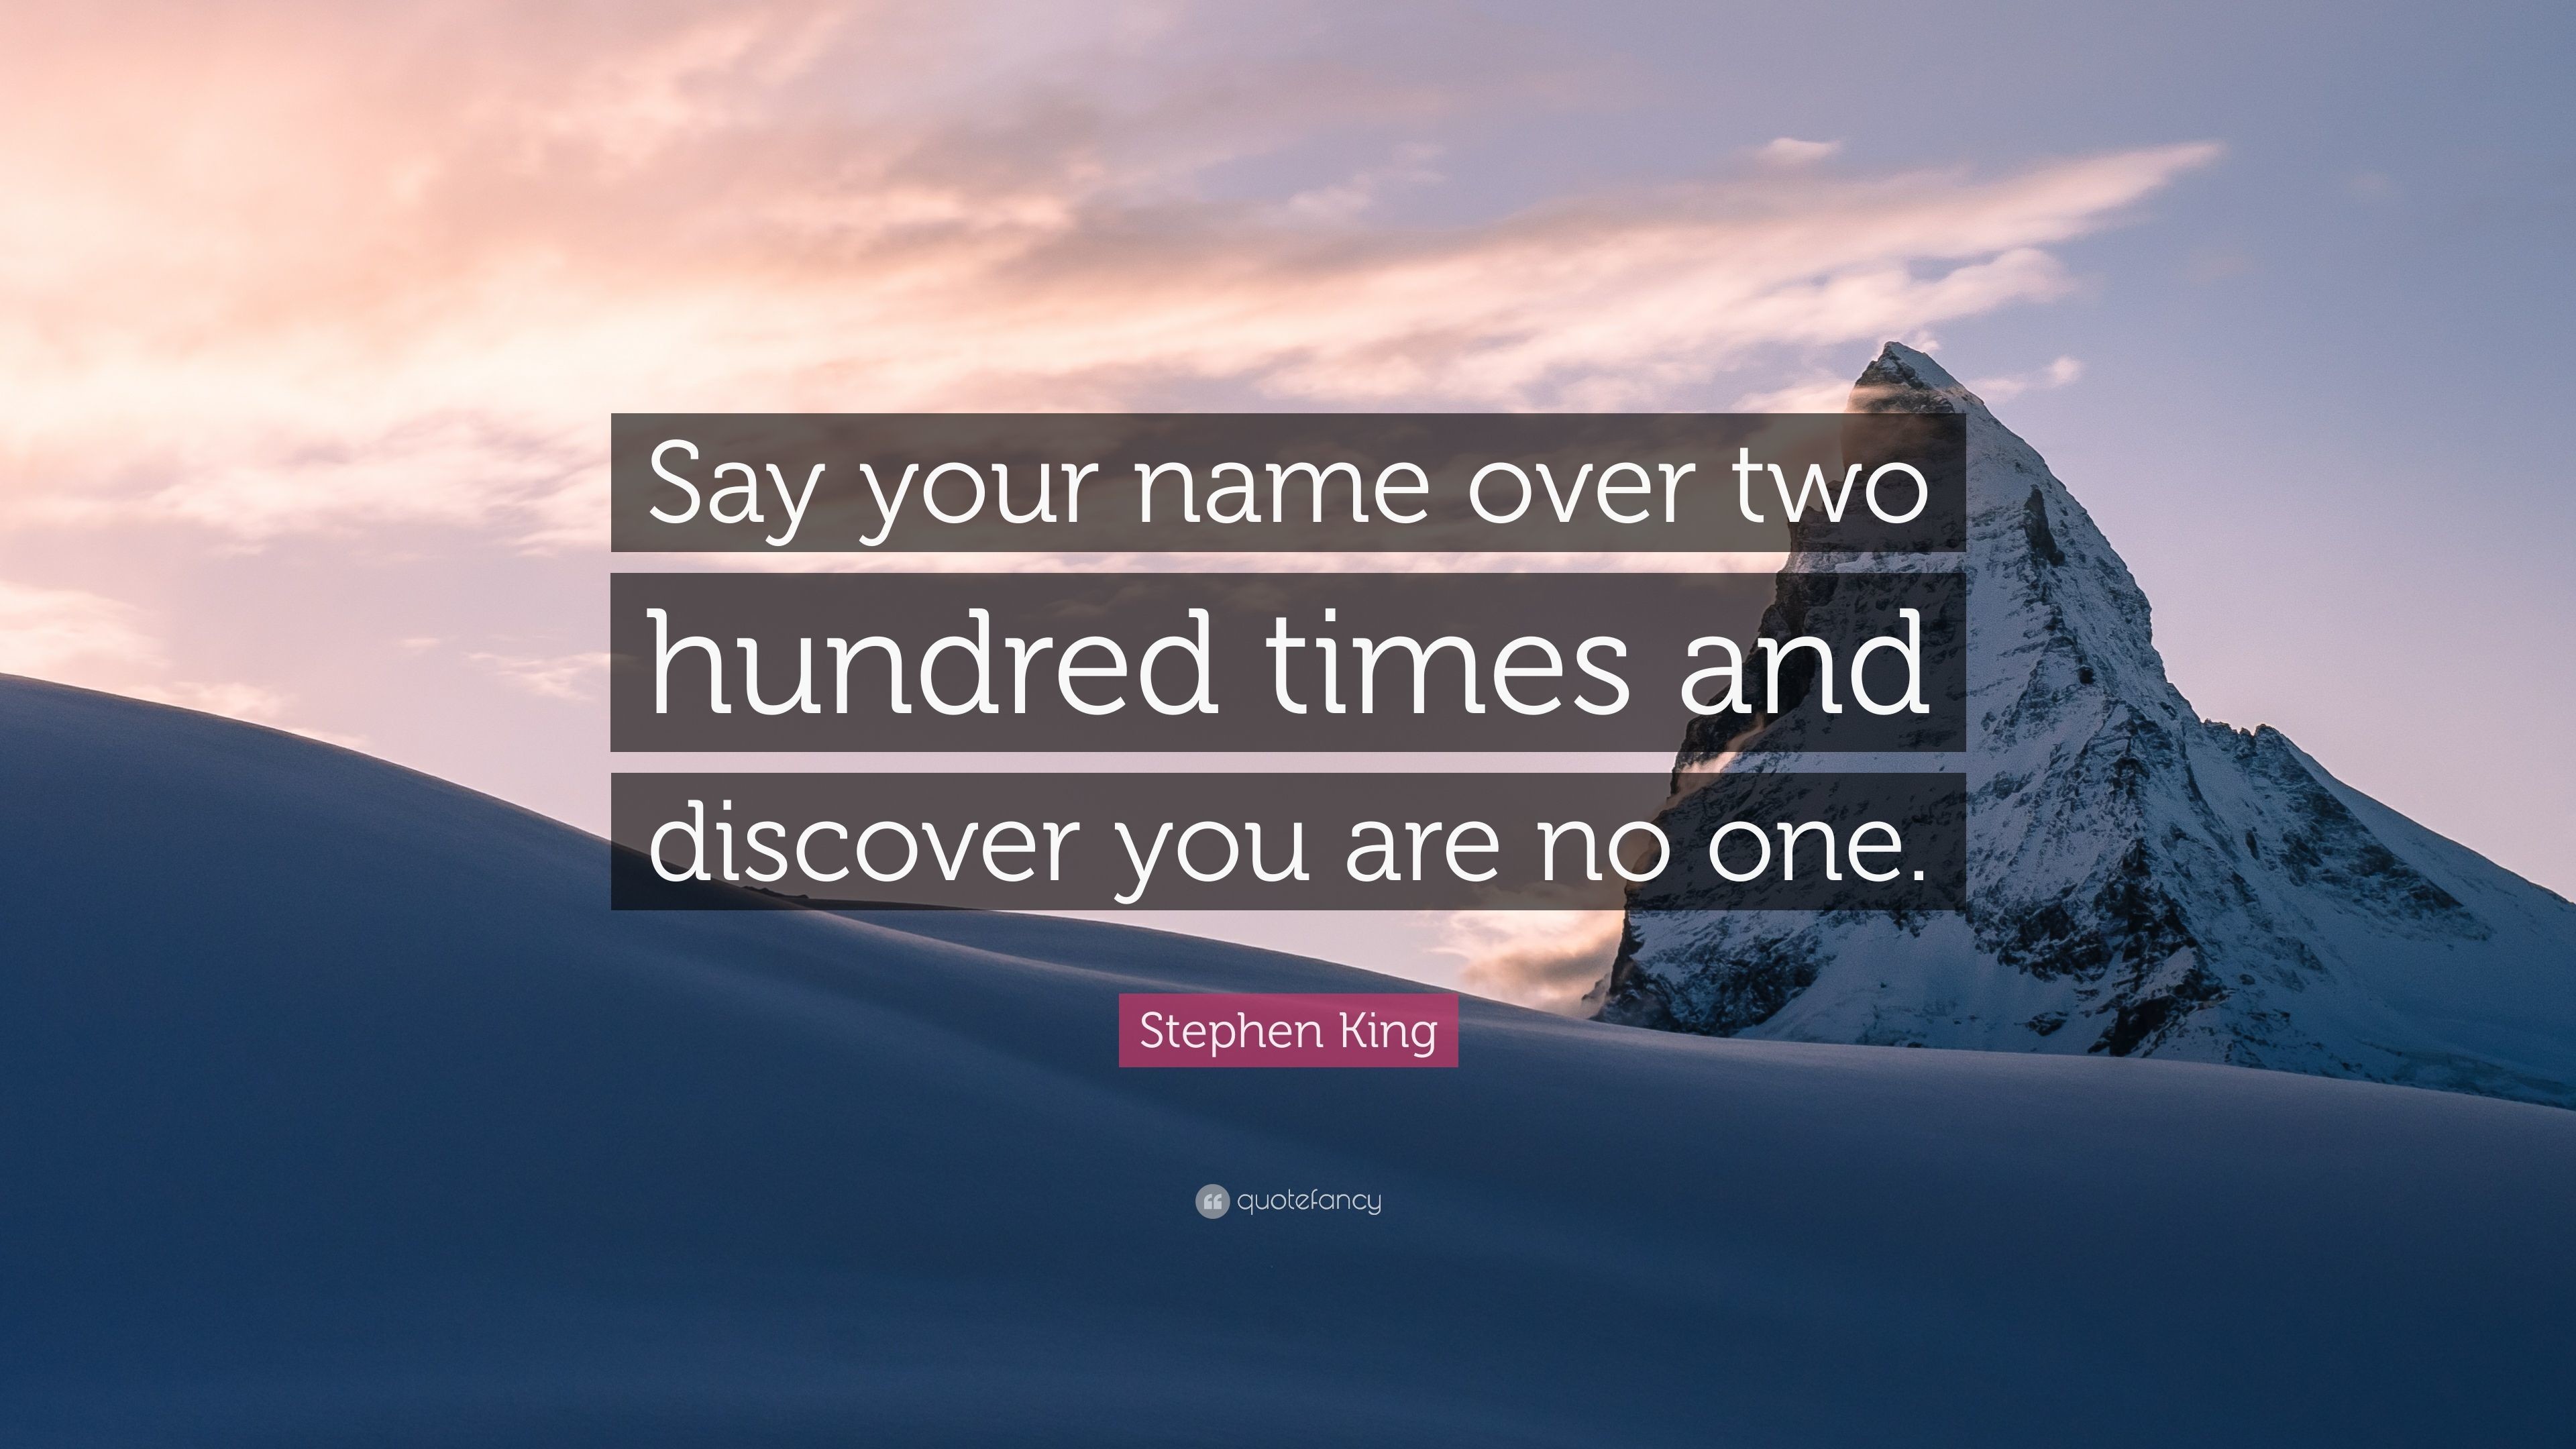 3840x2160 Stephen King Quote: “Say your name over two hundred times and discover you  are